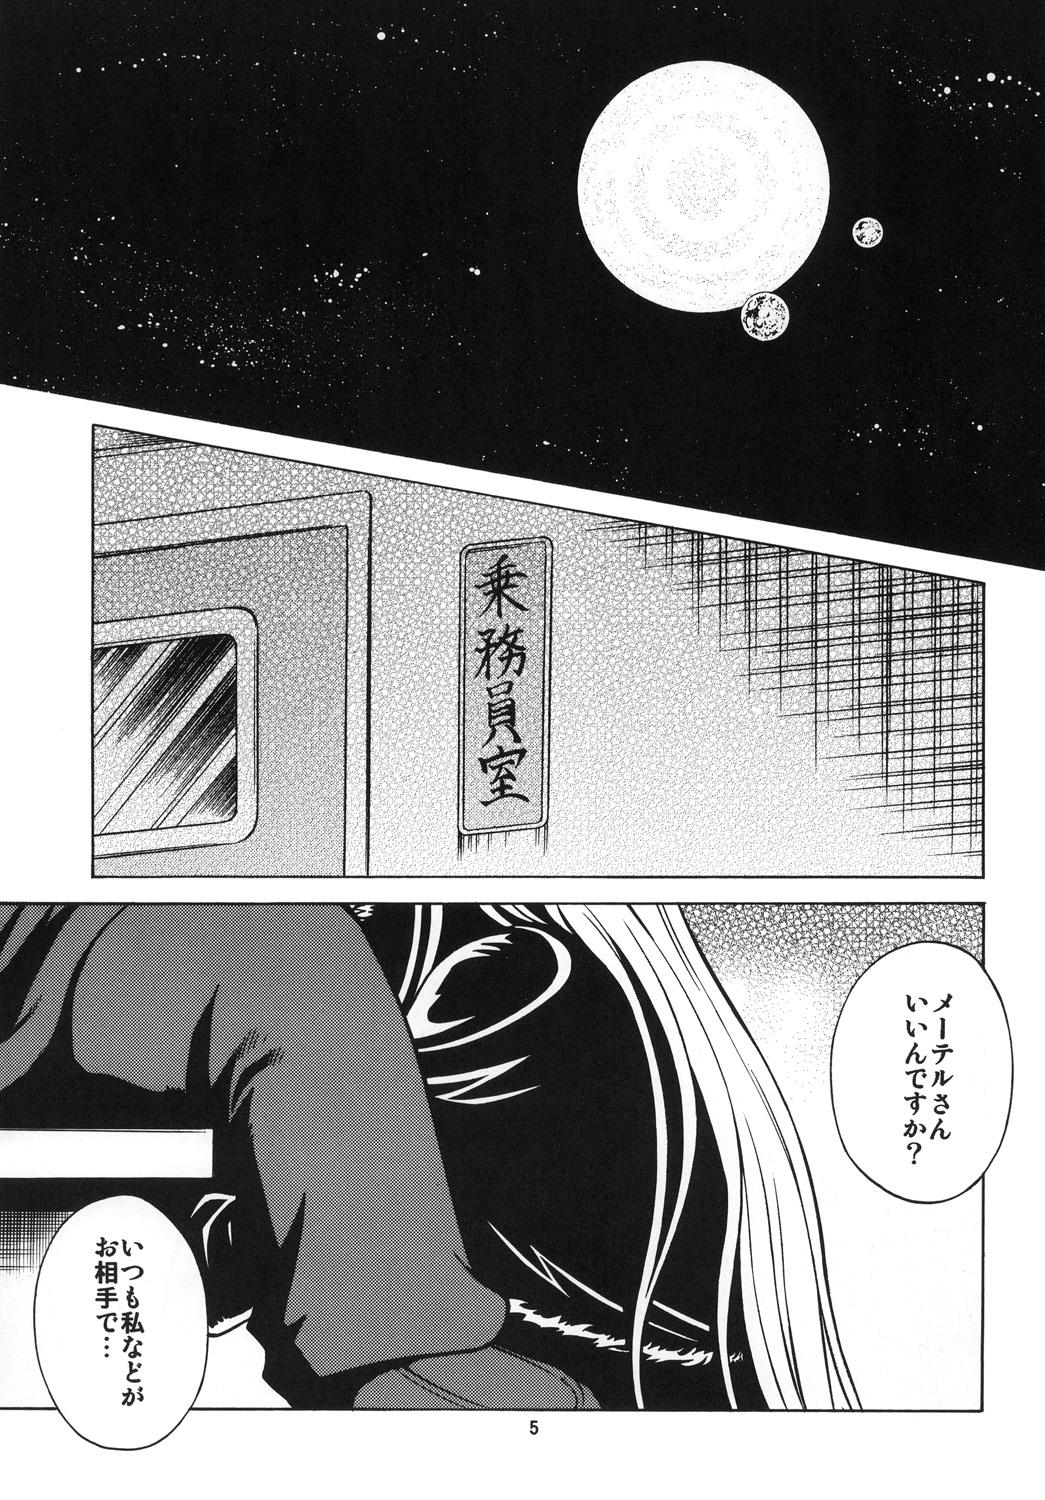 Pink NIGHTHEAD＋ - Galaxy express 999 Space pirate captain harlock Hard Sex - Page 4